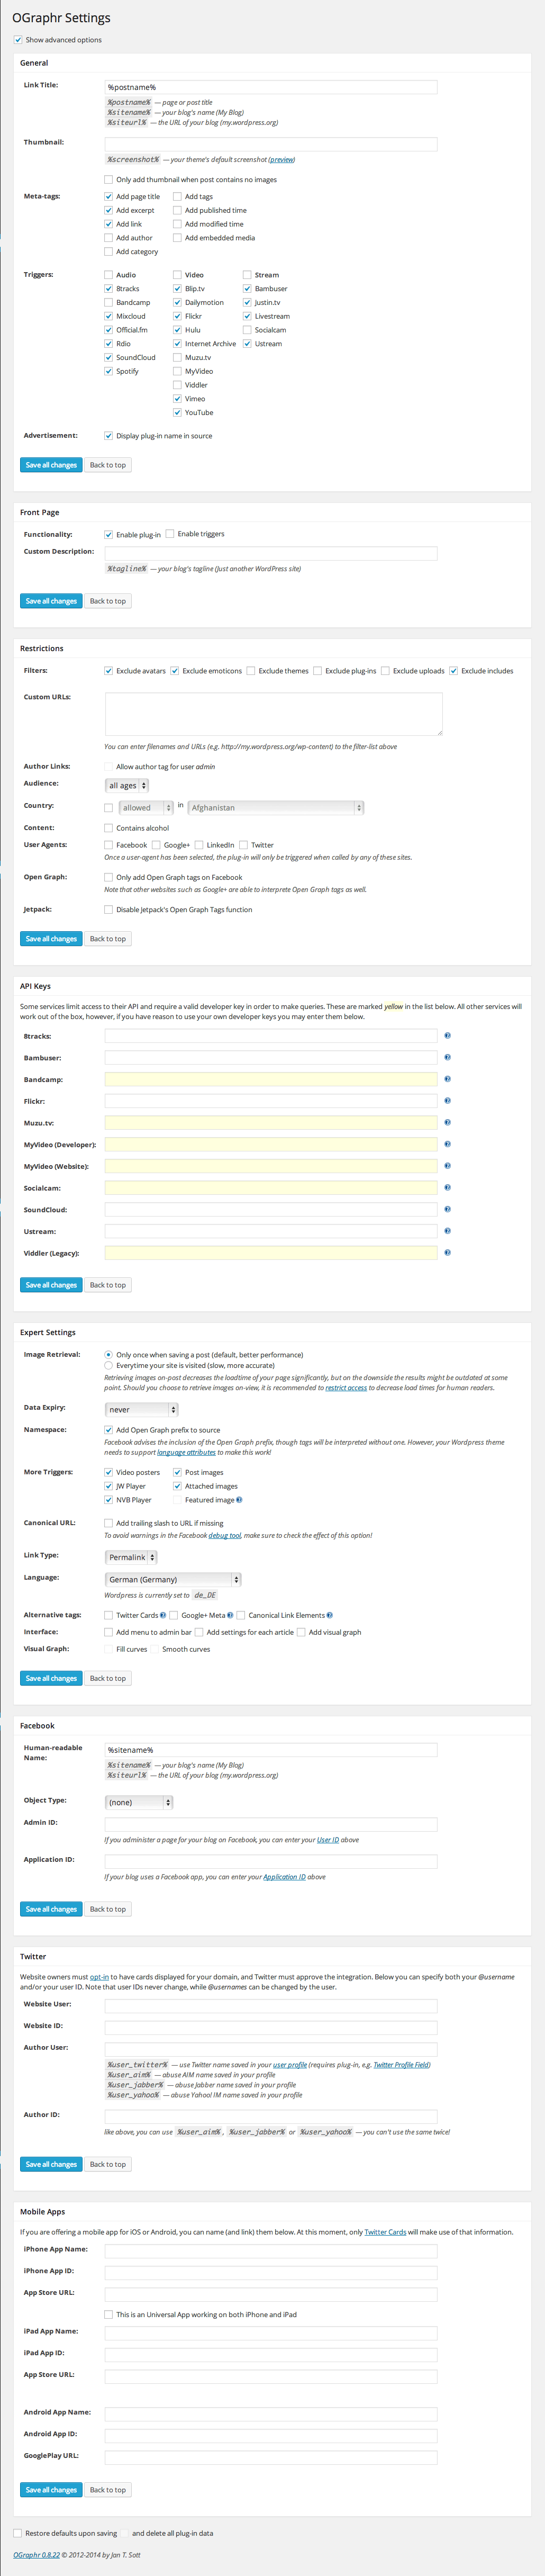 advanced settings page for OGraphr 0.8